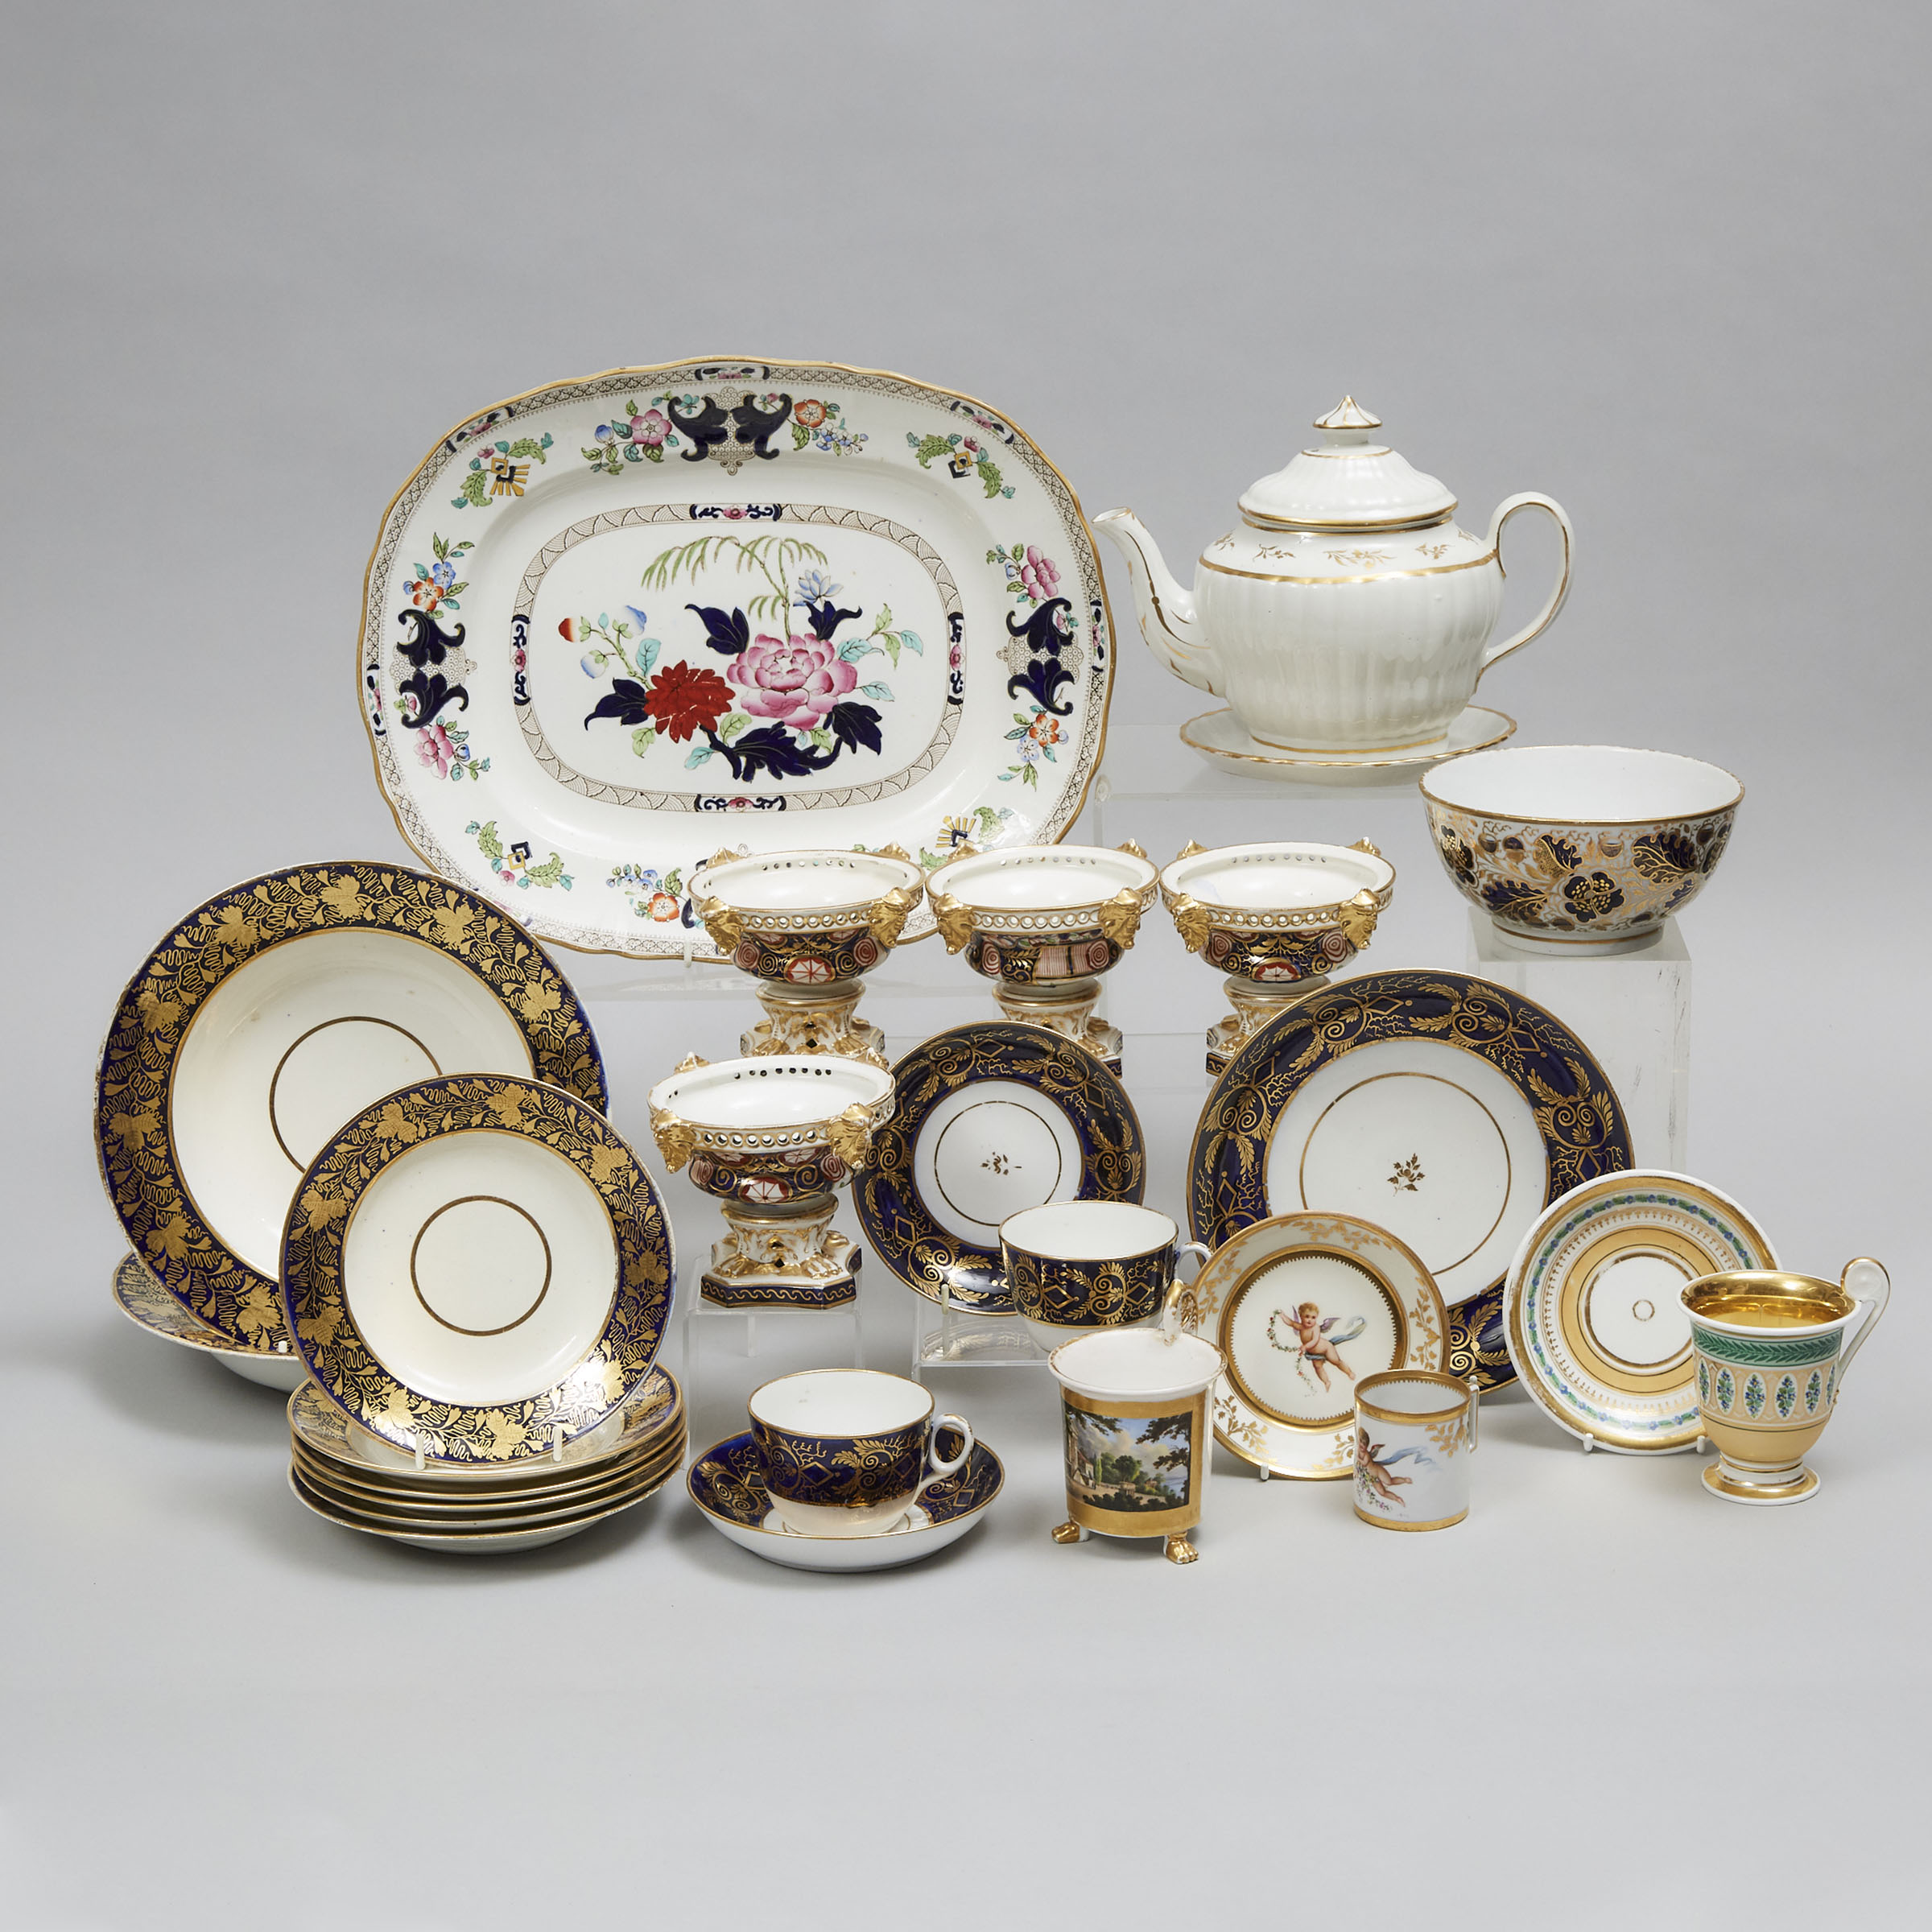 Group of English and Continental Porcelain, 19th century